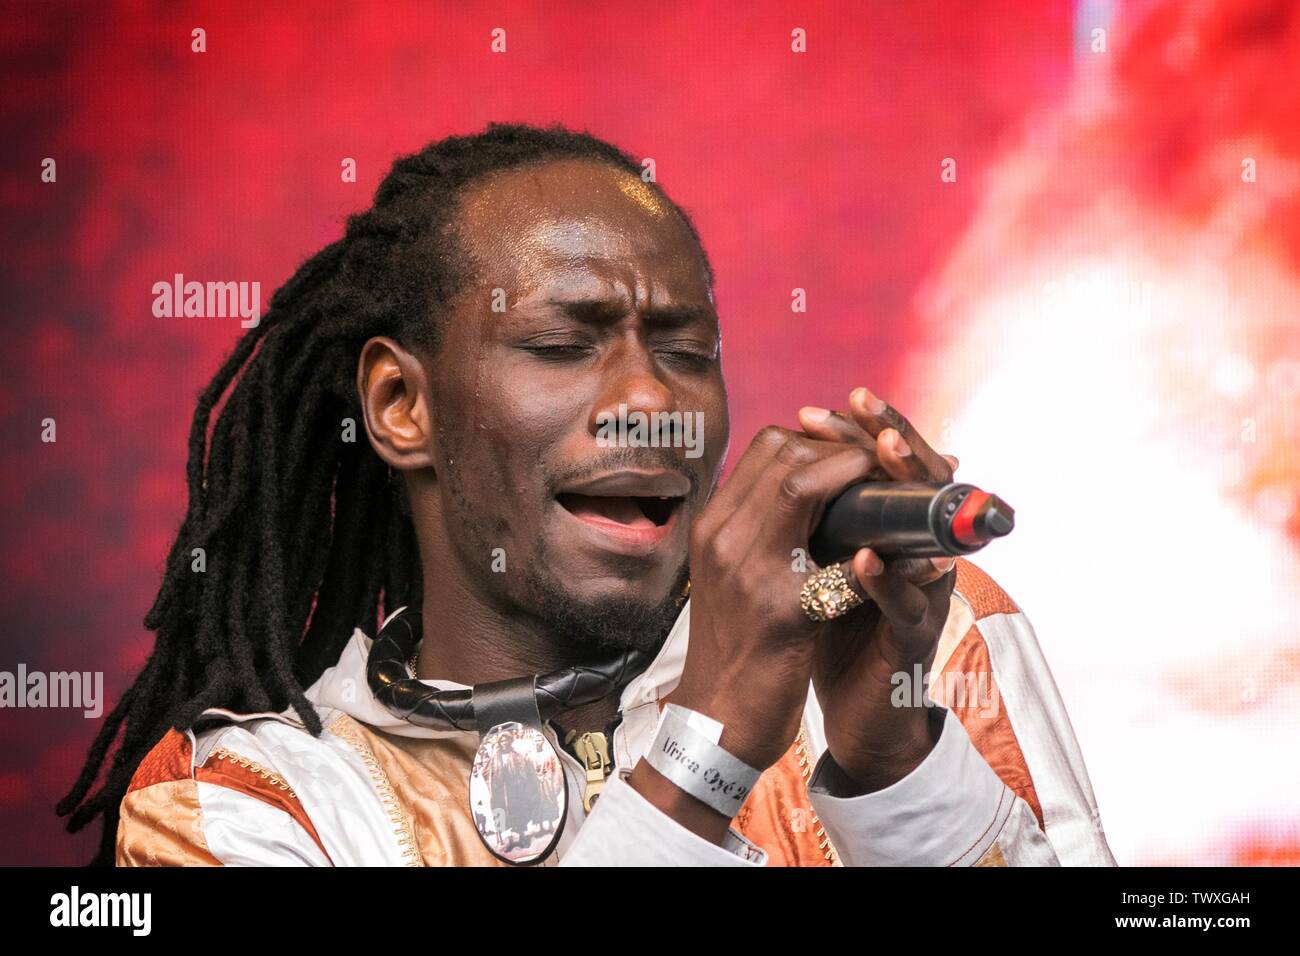 Liverpool, Merseyside, UK. 23rd June 2019. Africa Oye Music Festival.  Carlou D performs at the fantastic Africa Oyé Festival in Liverpool;s Sefton Park. The UK’s largest free celebration of African music and culture, takes place annually in Liverpool. Beginning in 1992 as a series of small gigs in the city centre, the event has gone from strength to strength, moving to its present Sefton Park home in 2002 to cope with demand.  Credit: Cernan Elias/Alamy Live News Stock Photo